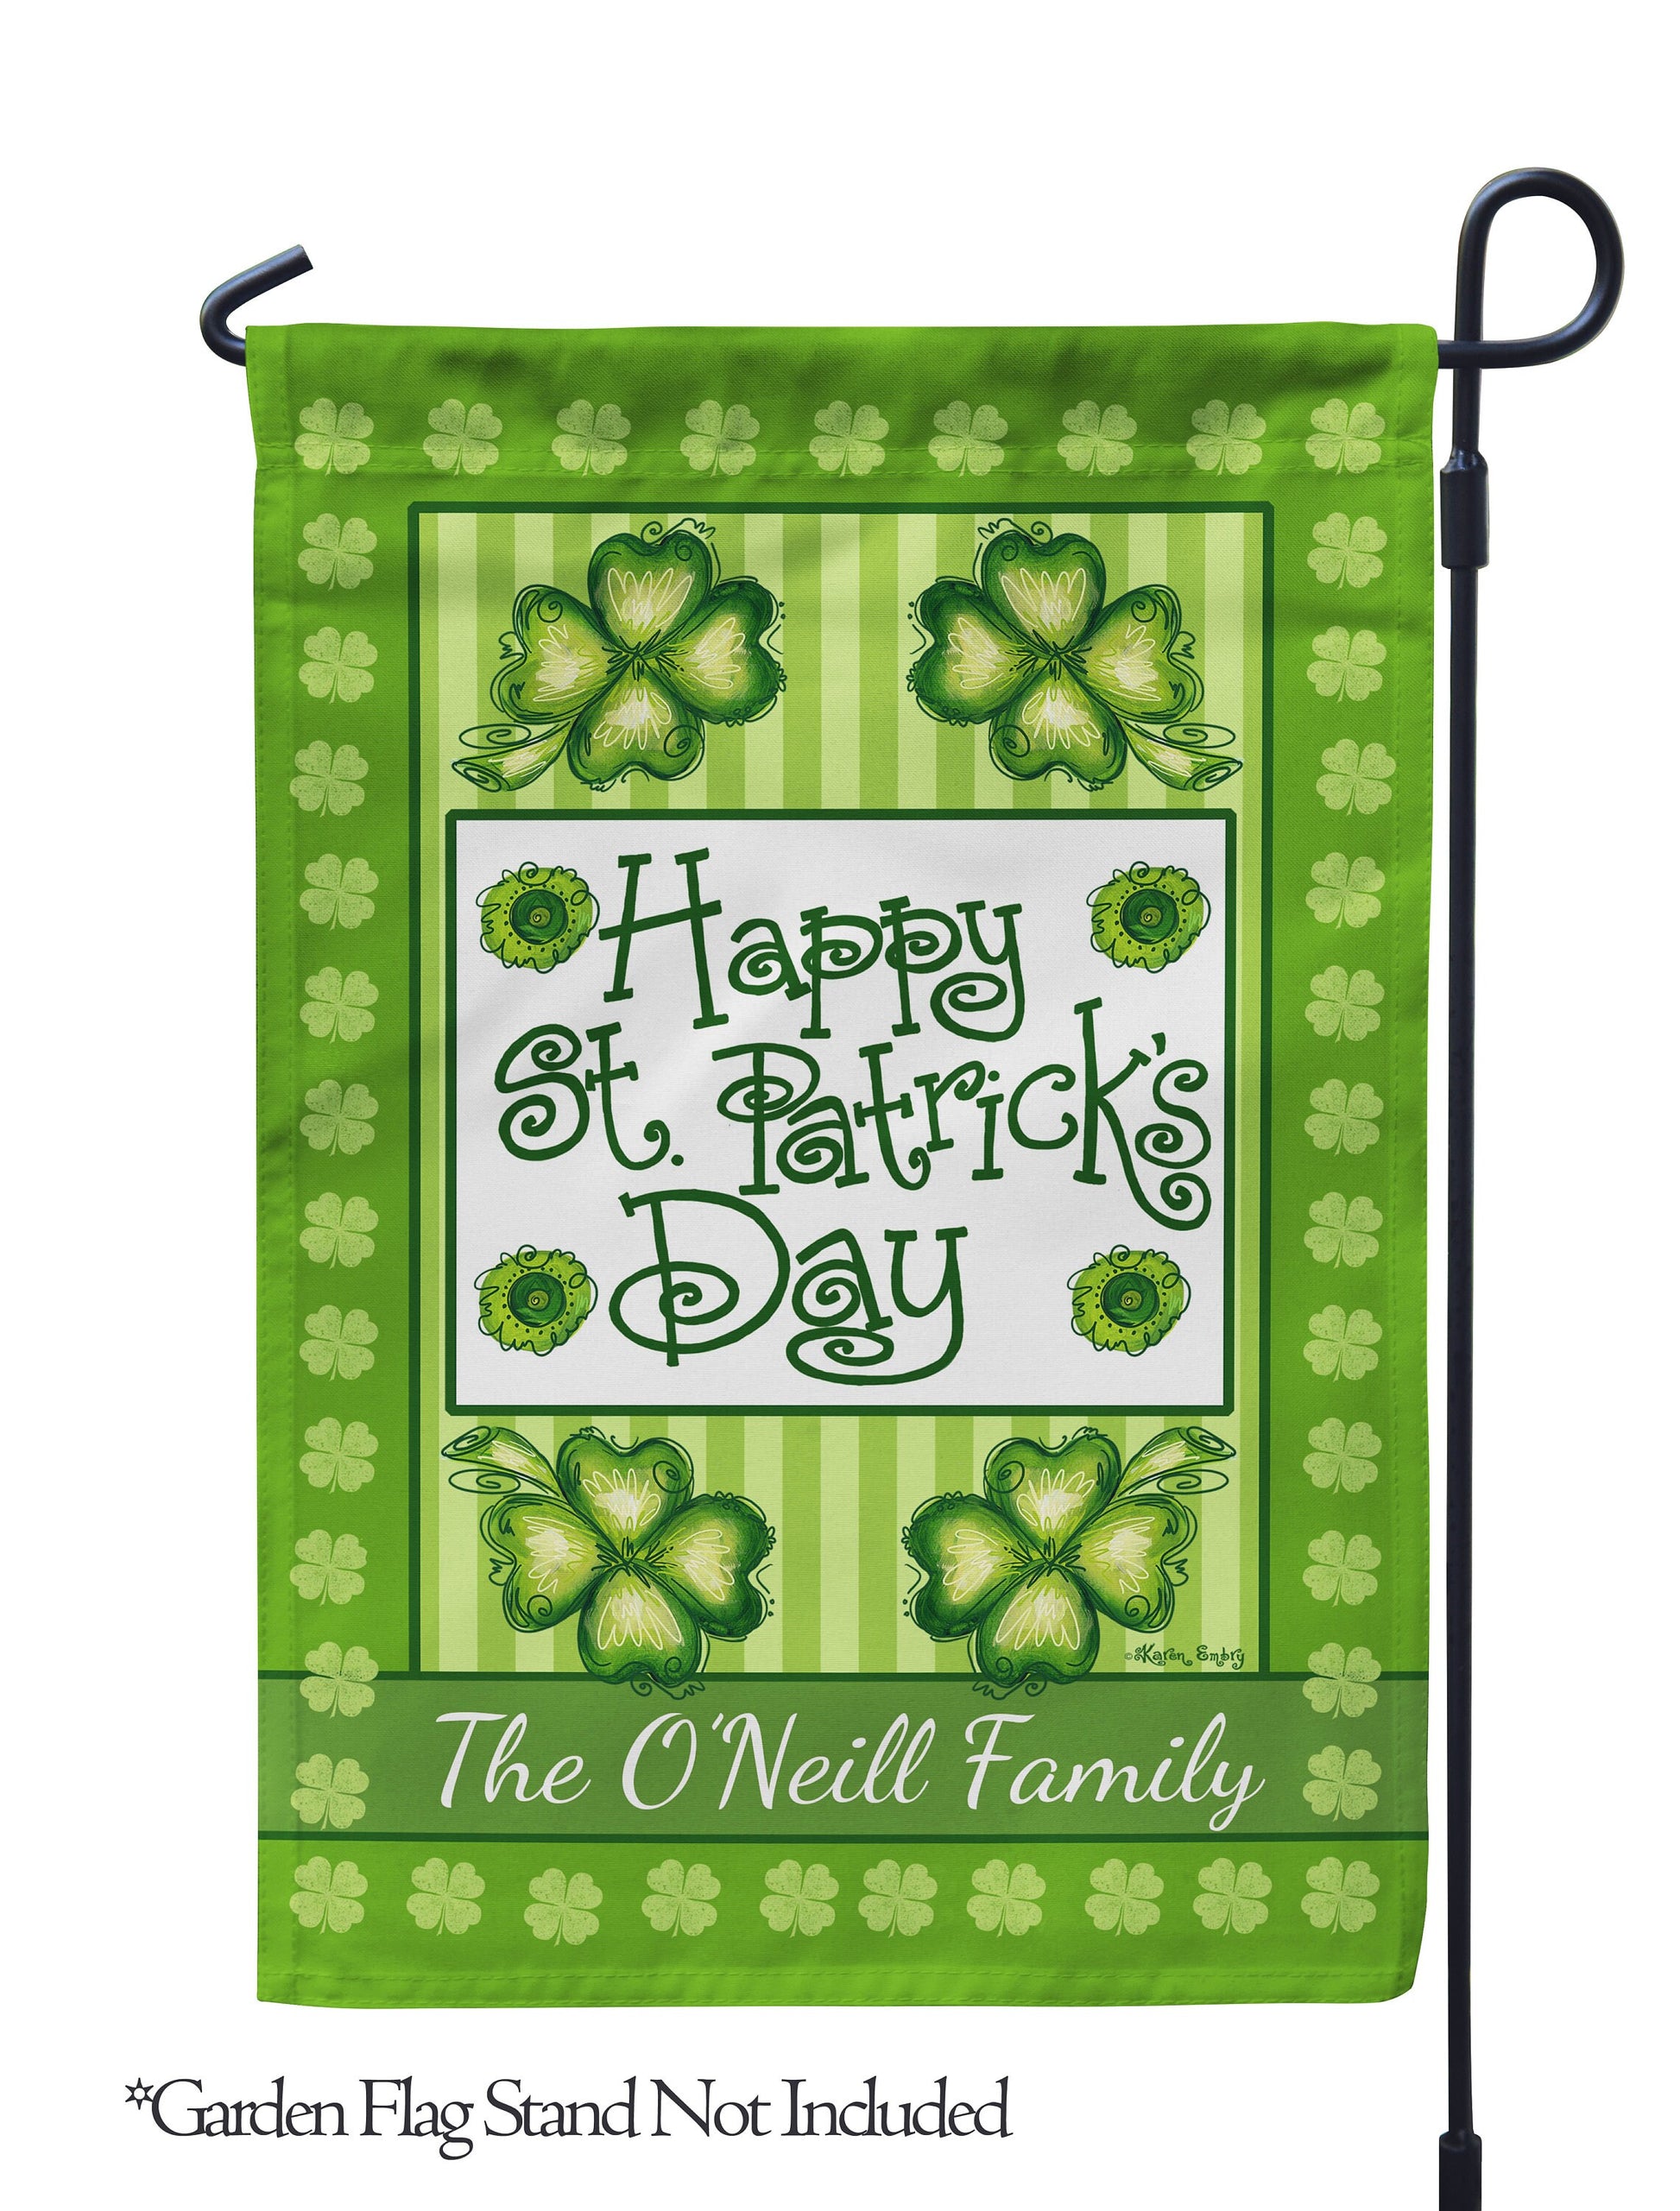 Happy St. Patrick's Day Personalized House Flag - St. Patrick's Day Garden Flag - St. Patrick's Day Decorative Flags